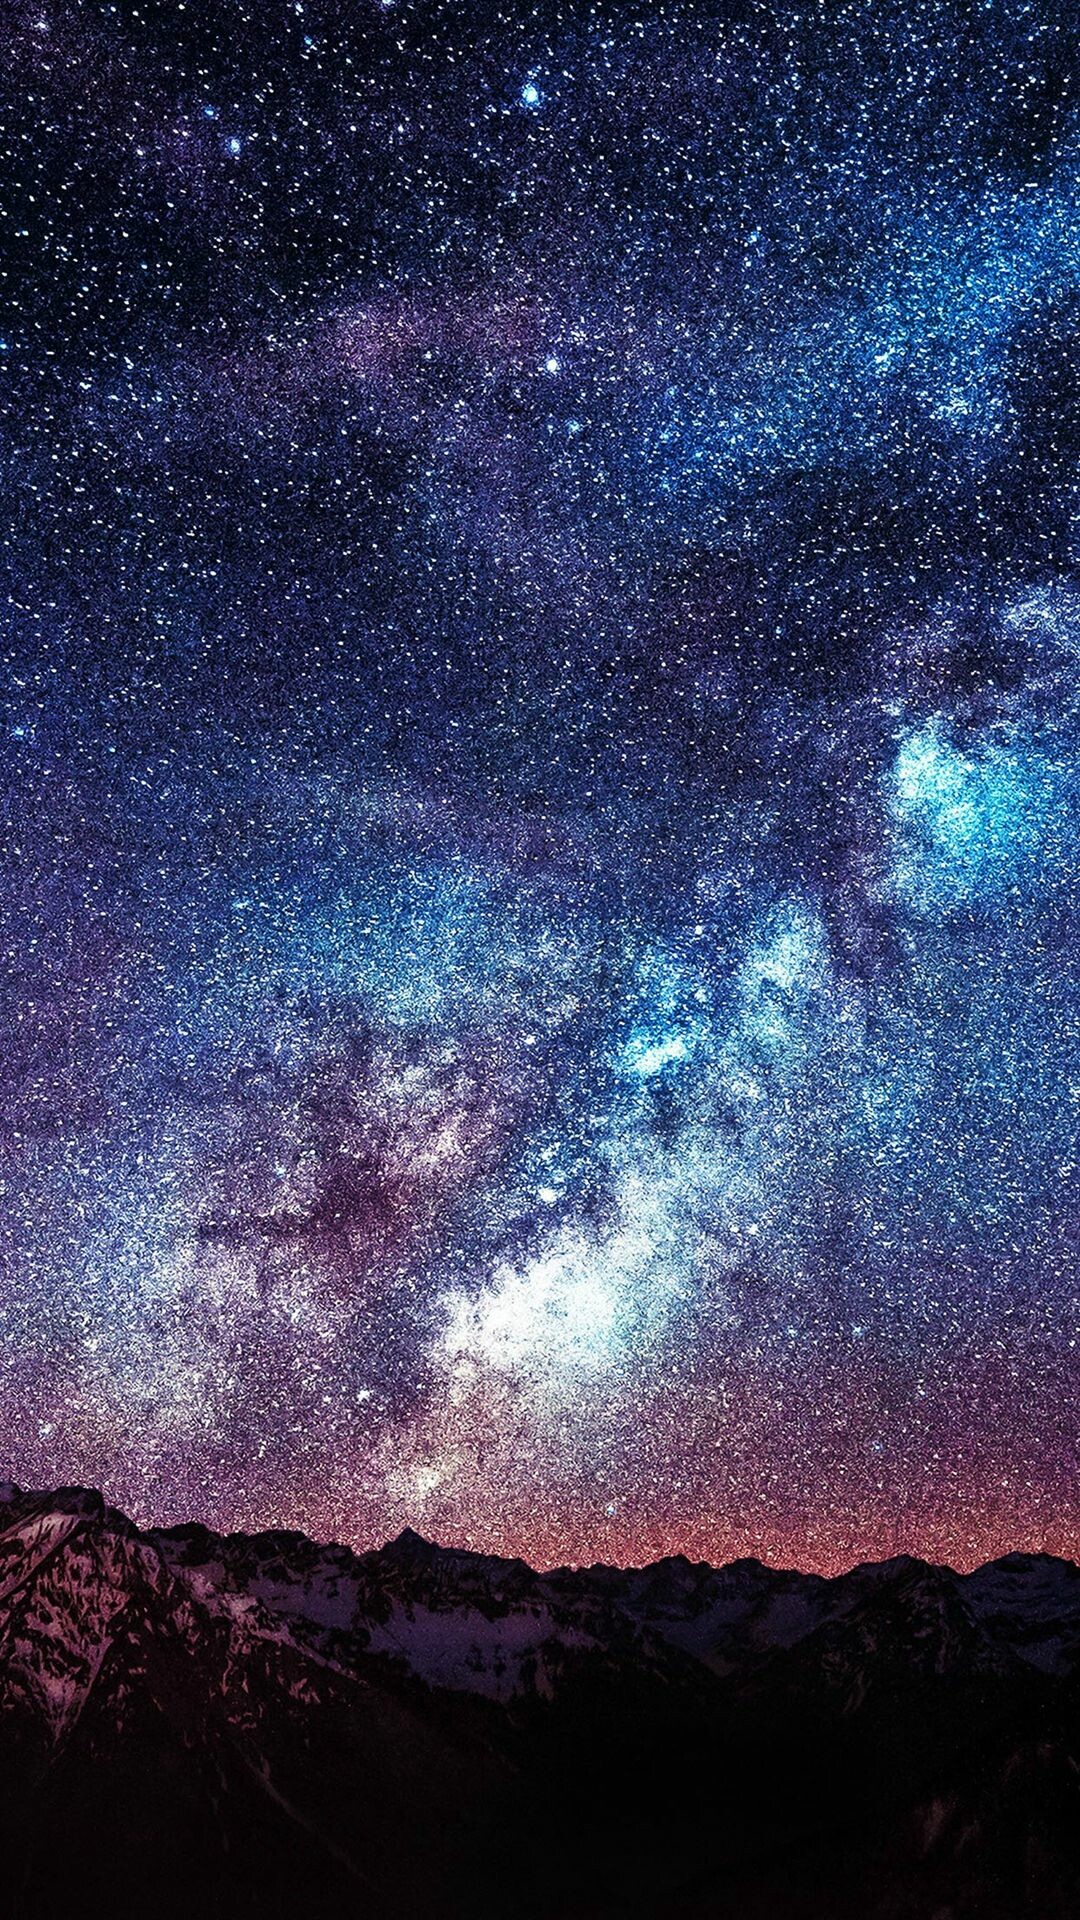 Milky Way: Space, The galaxy has a supermassive black hole at its center called Sagittarius A*. 1080x1920 Full HD Wallpaper.